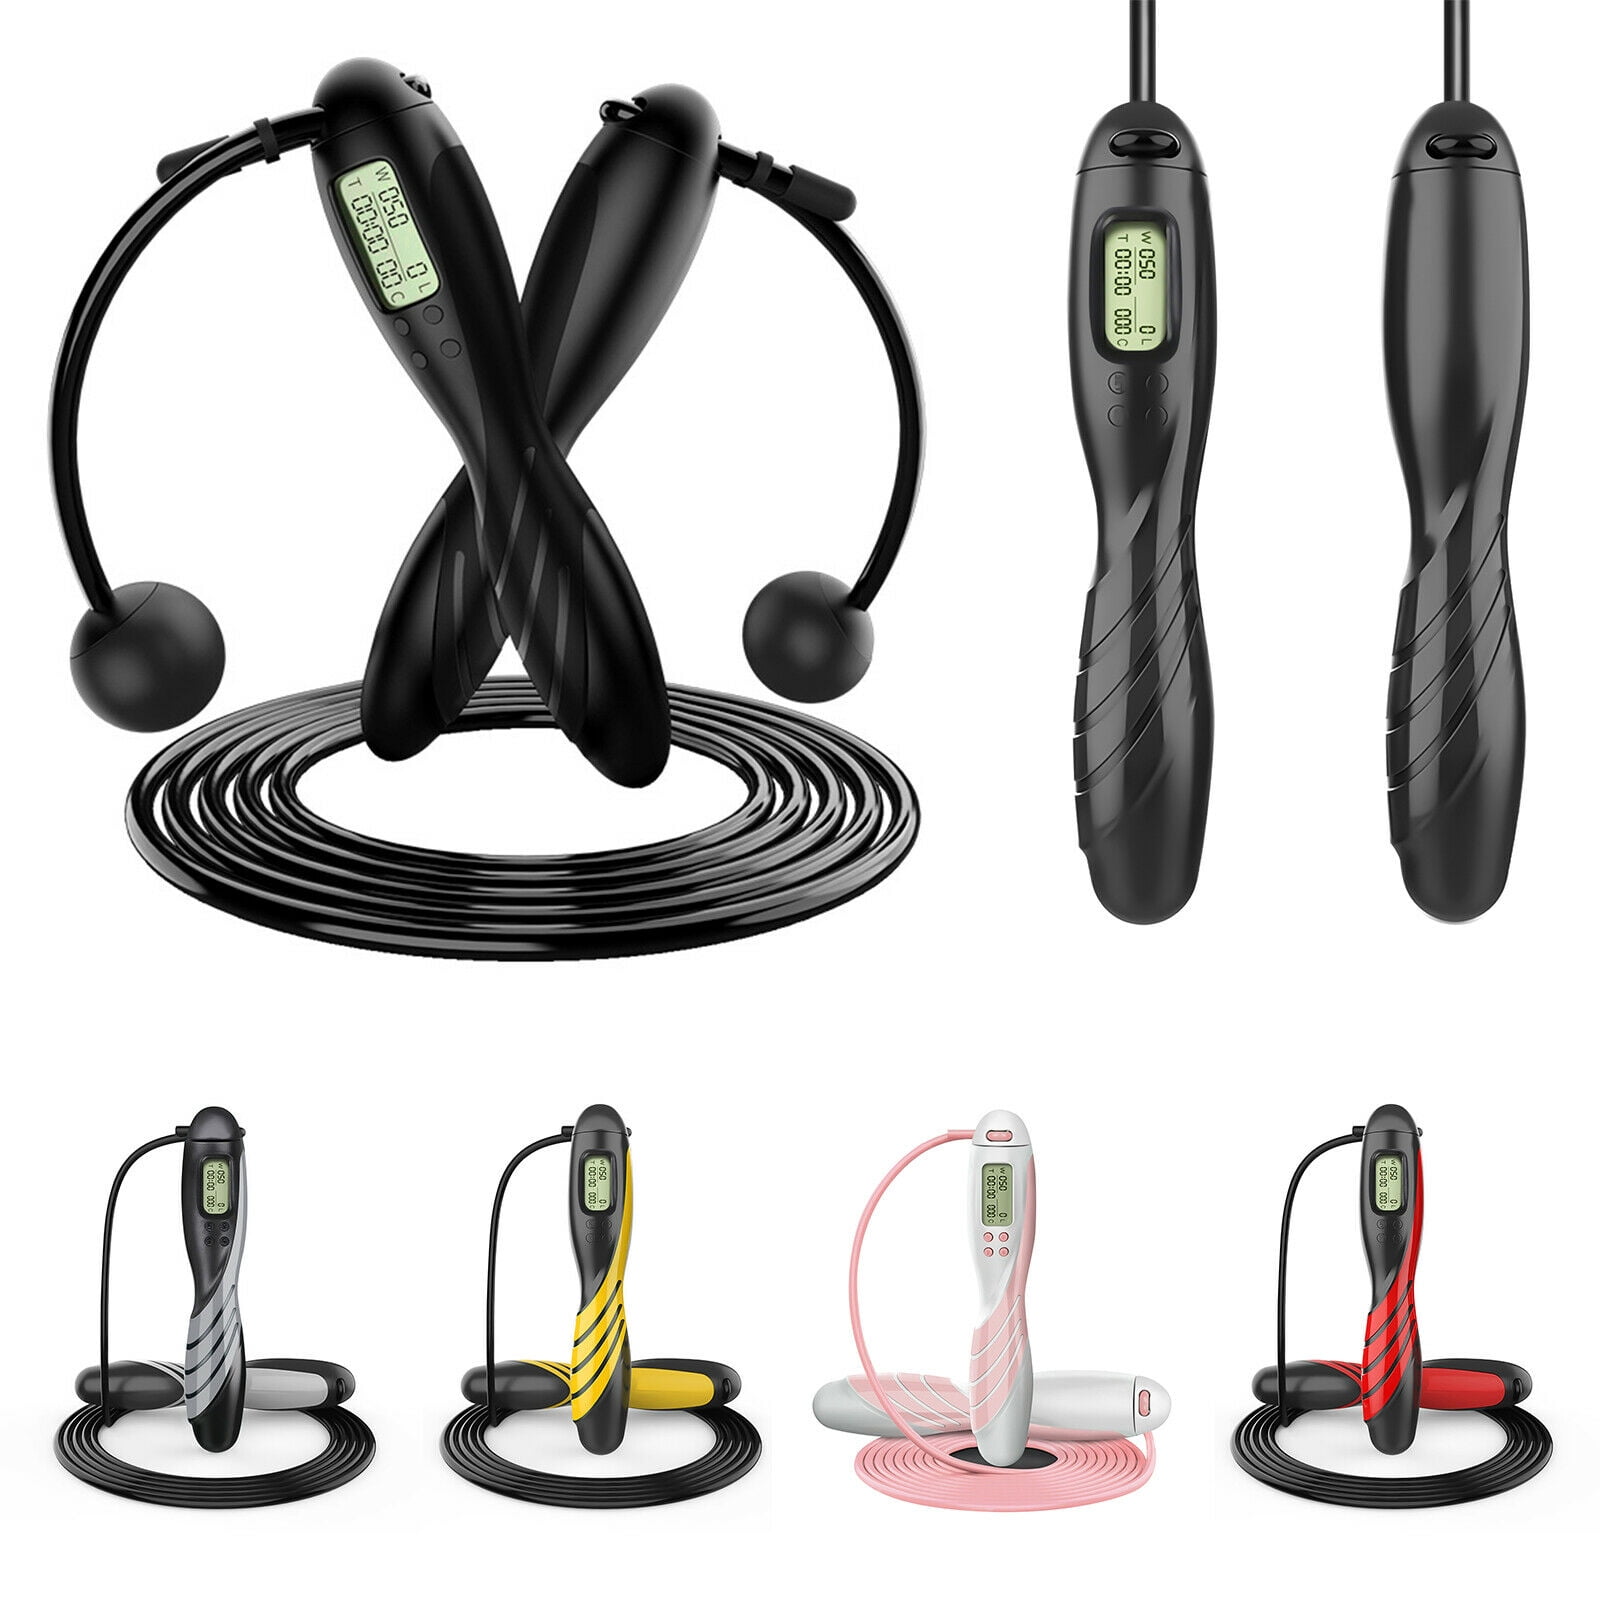 Adjustable Digital Fitness With Calorie Counter Electronic Counting Jump Rope 